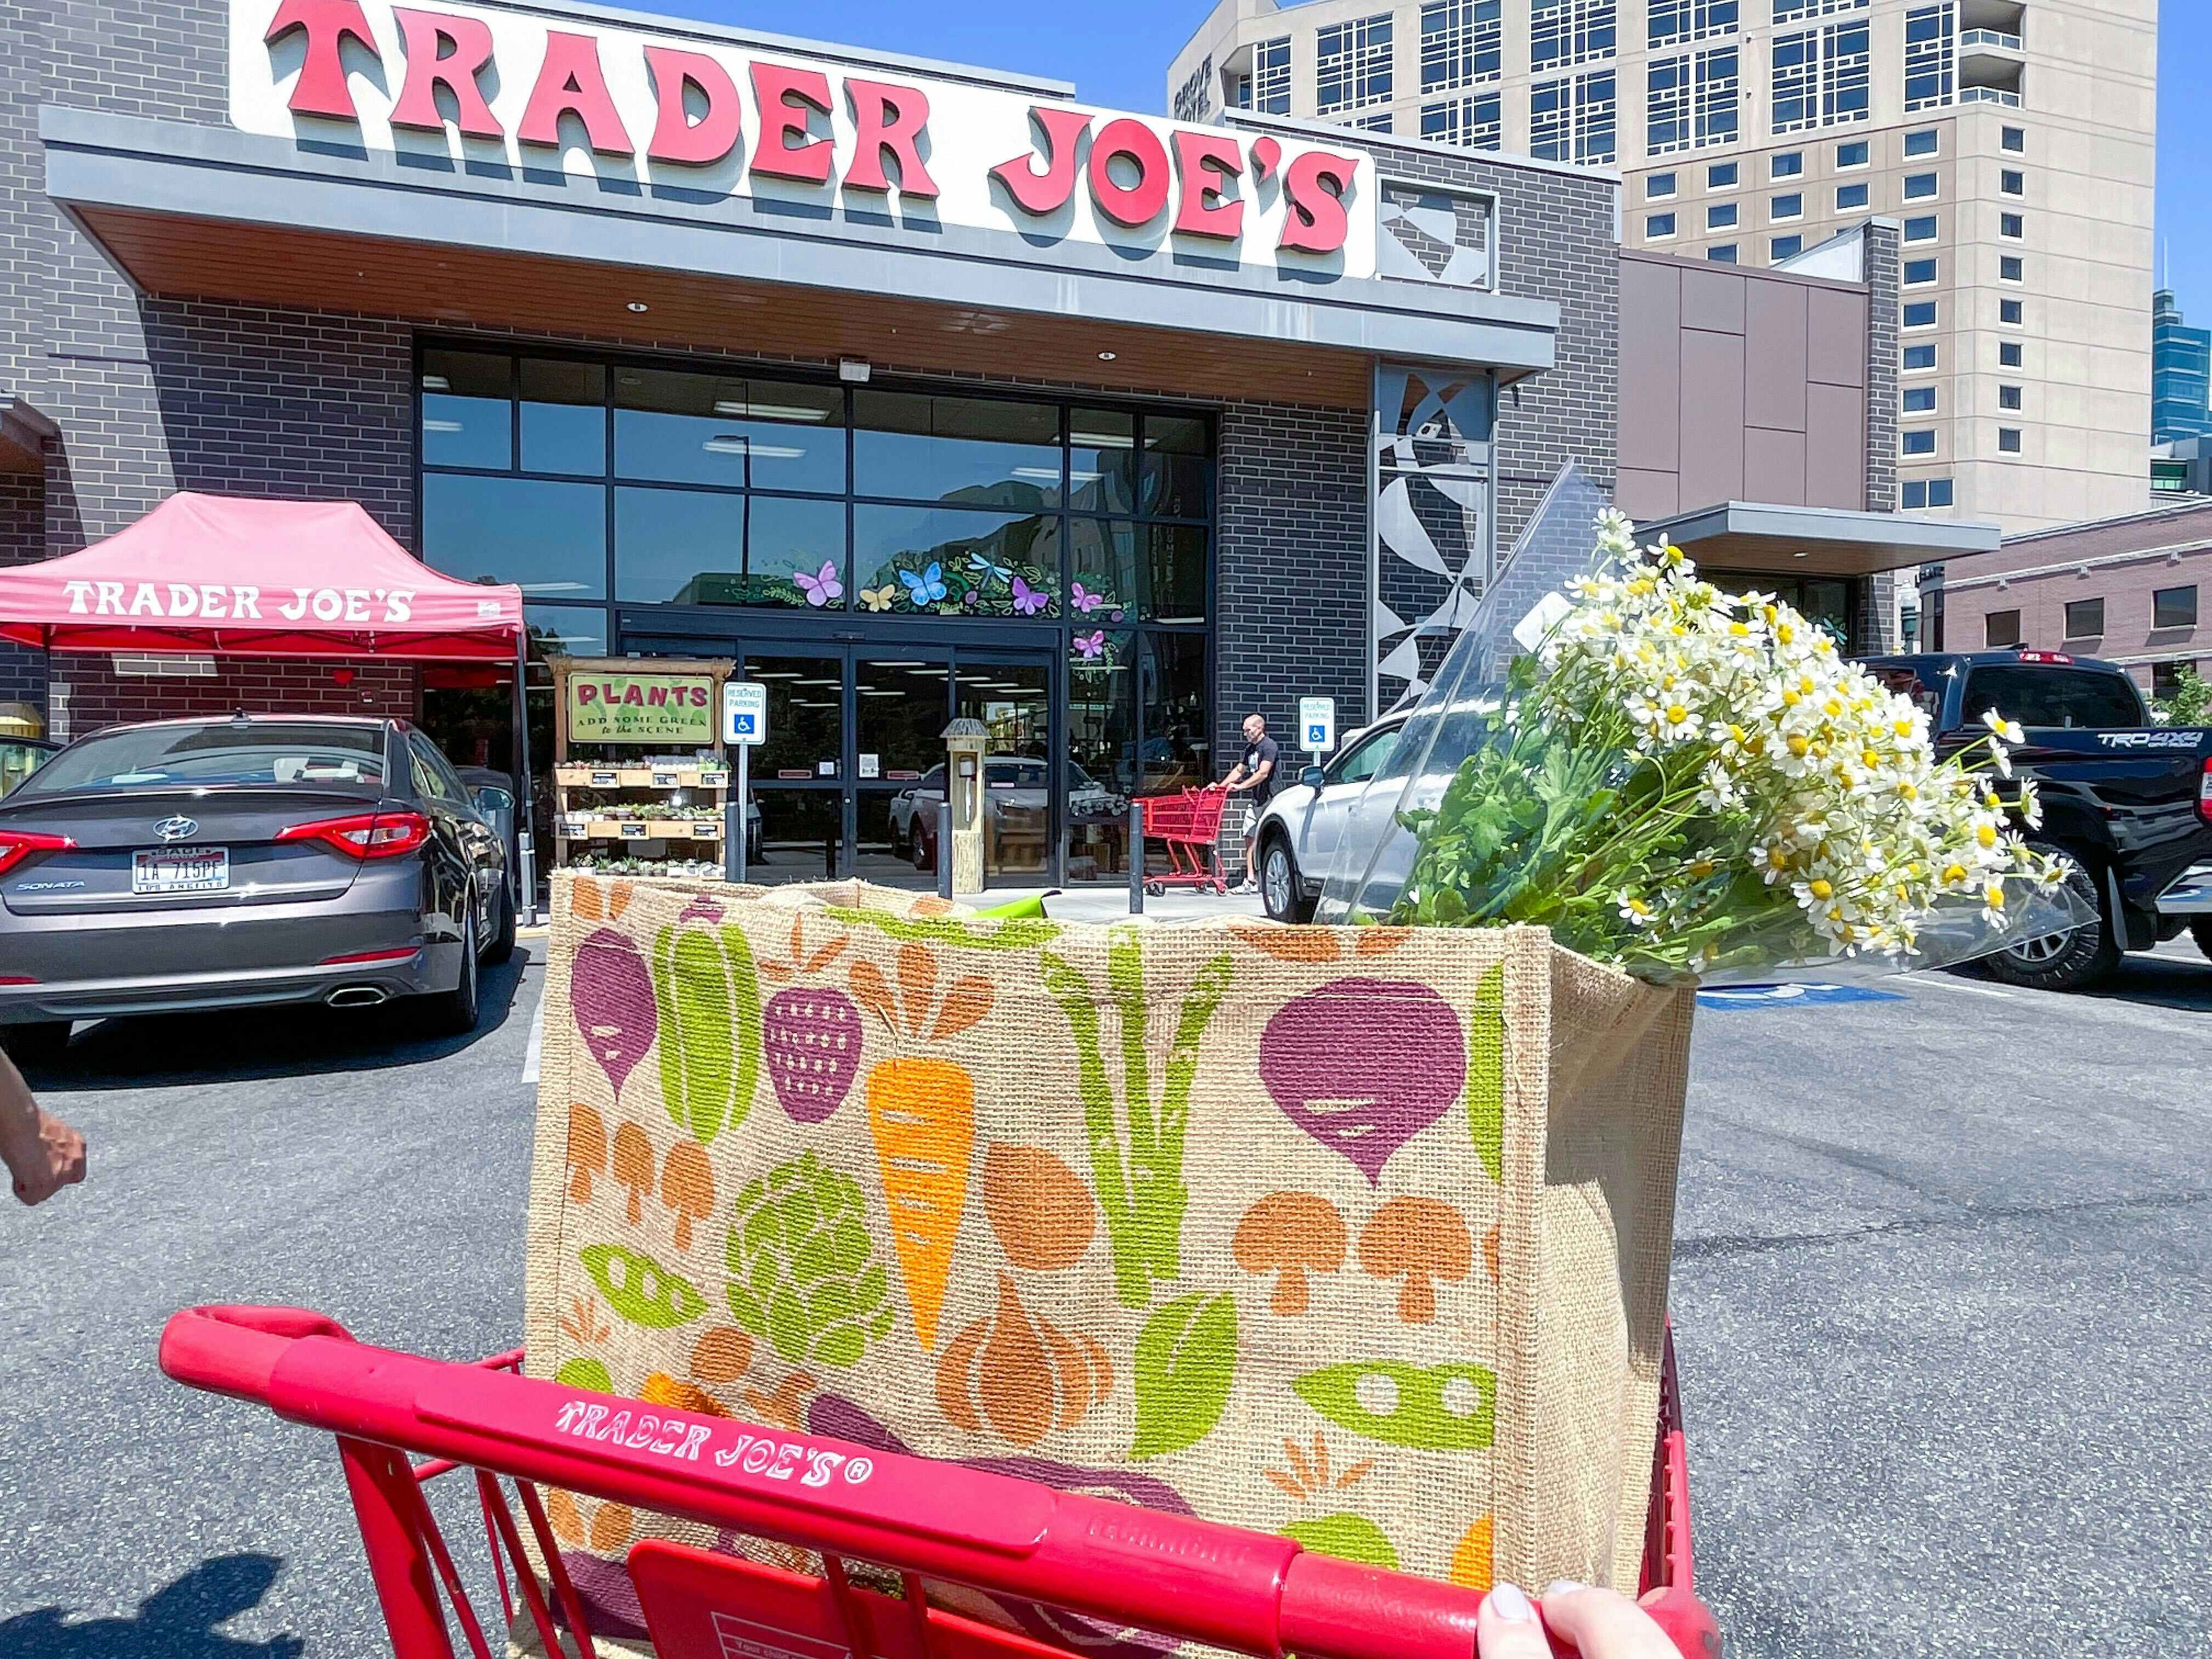 A Trader Joe's shopping cart with bags of groceries in the basket, parked outside of a Trader Joe's grocery store.